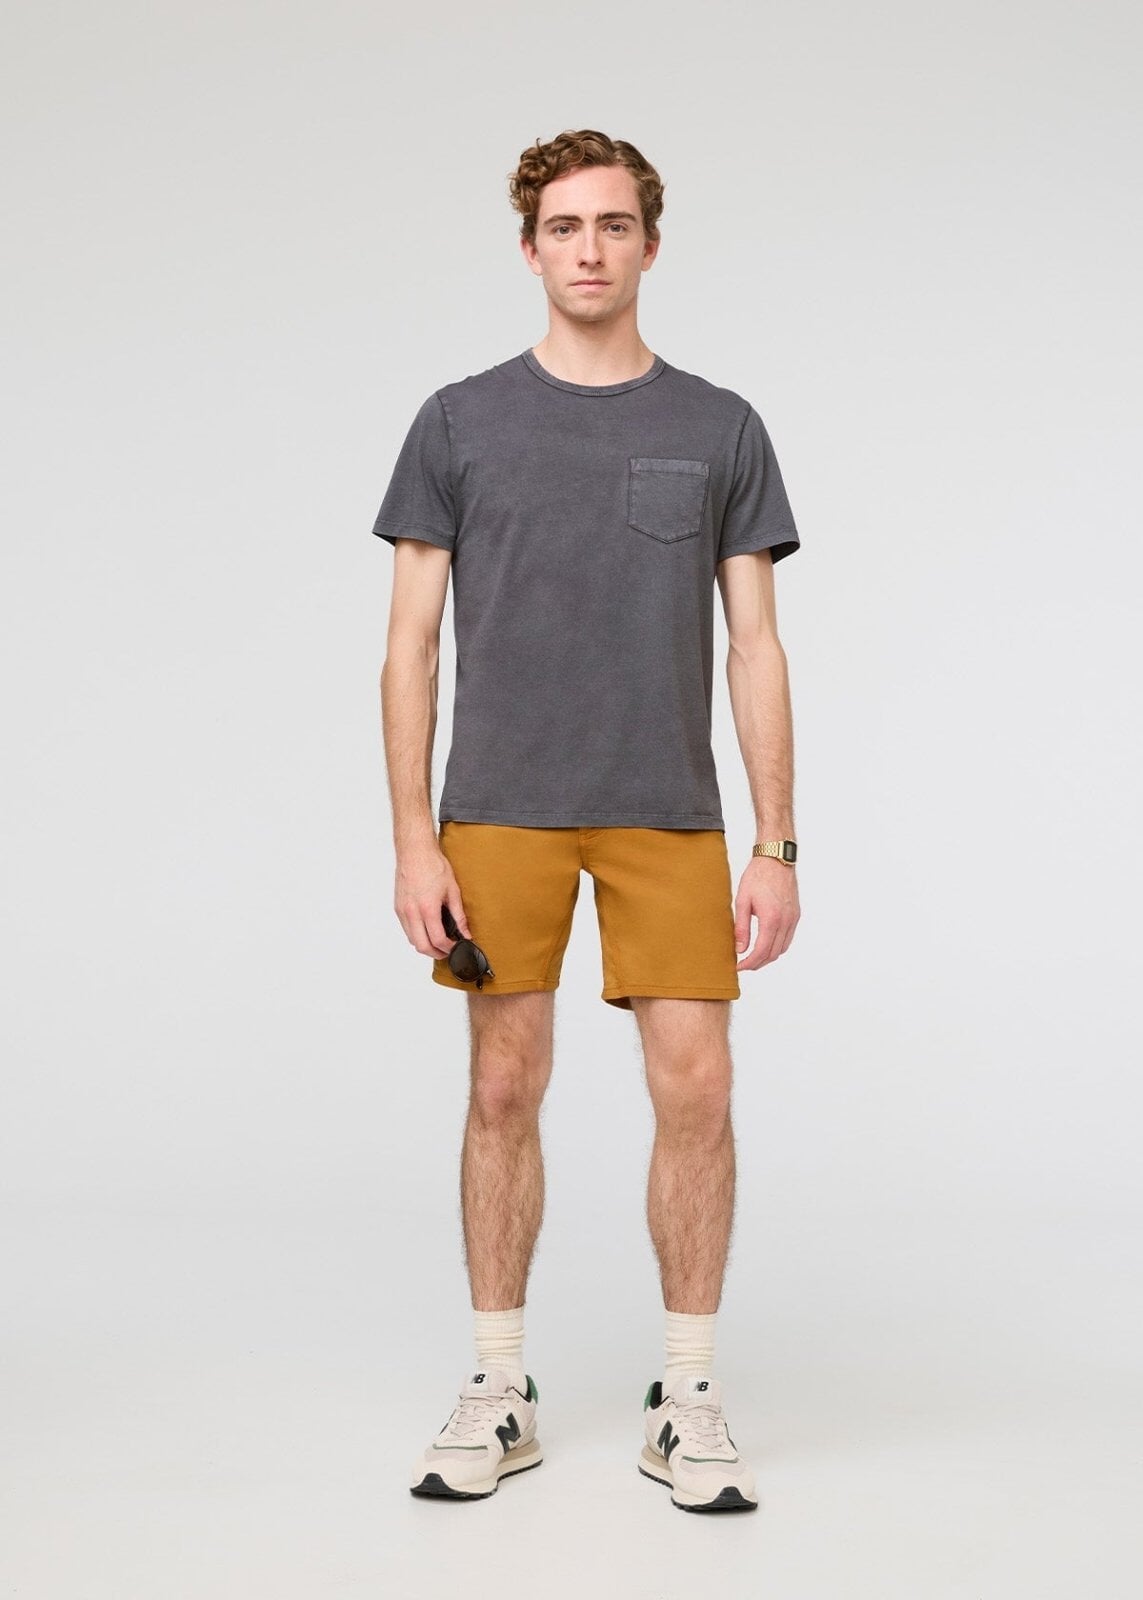 Comfortable Men's Shorts - Performance by DUER – Tagged length-7